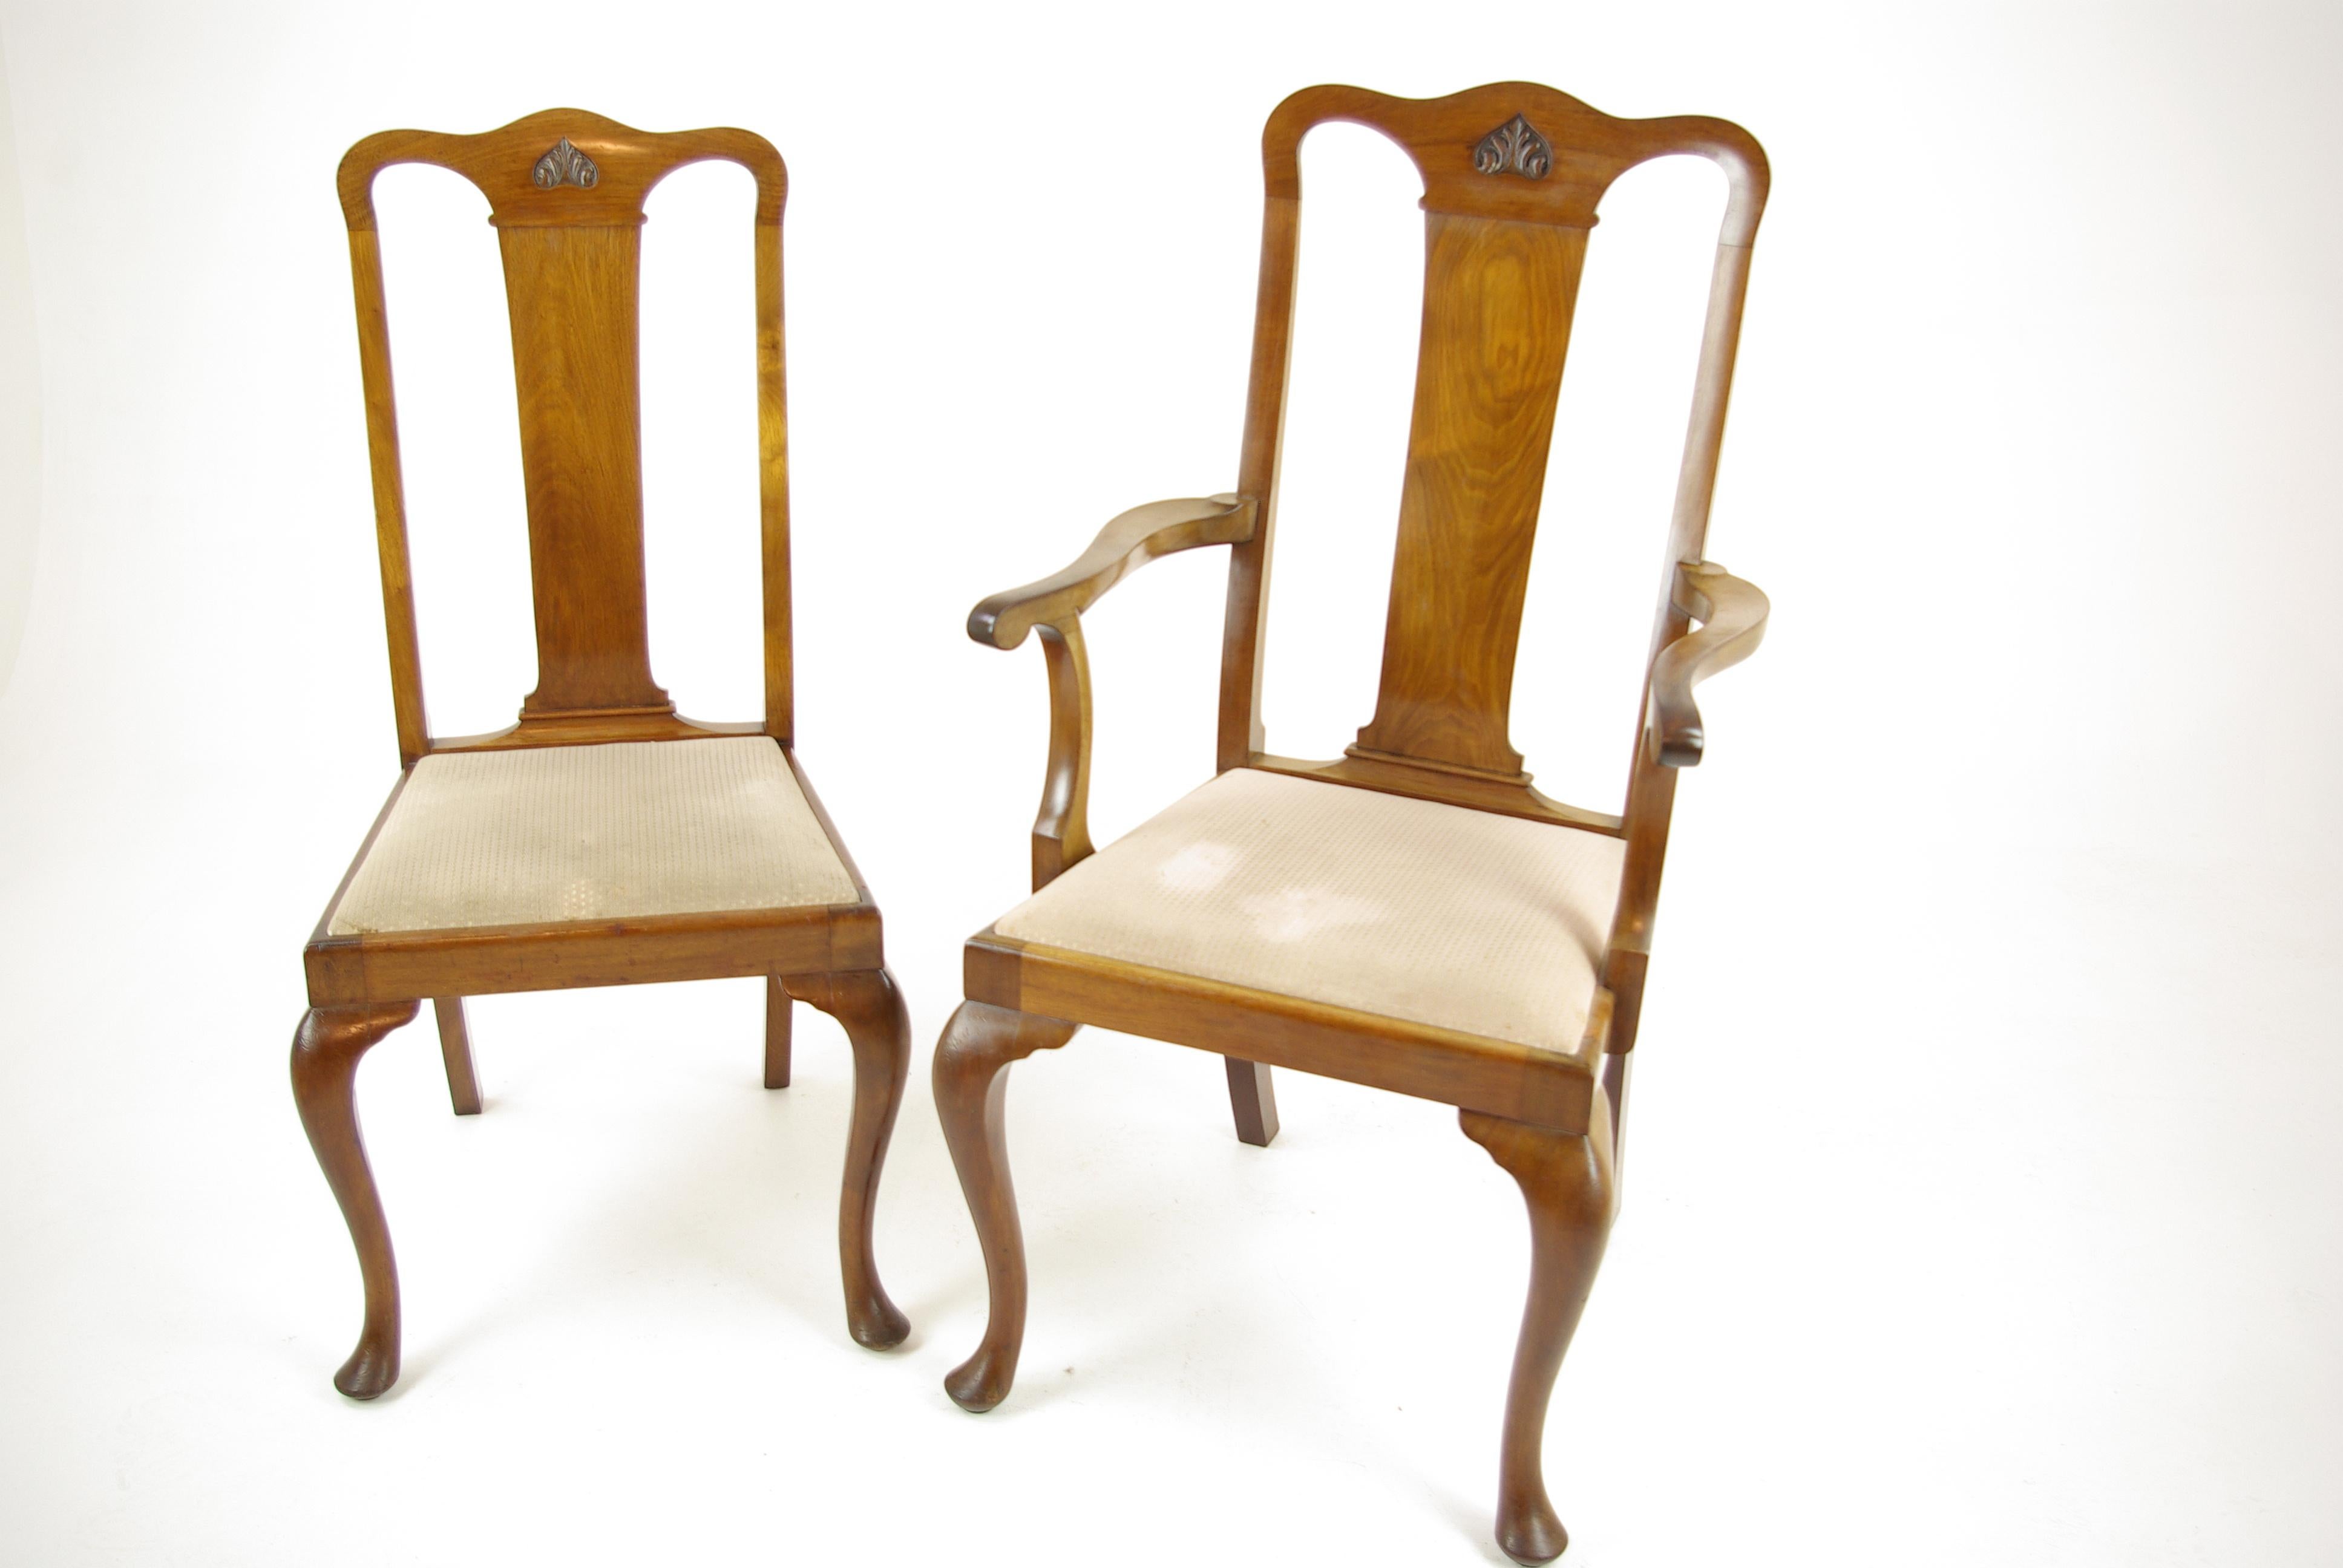 Scottish Antique Walnut Chairs, Queen Anne Chairs, 7 Dining Chairs, Scotland 1920, B1196